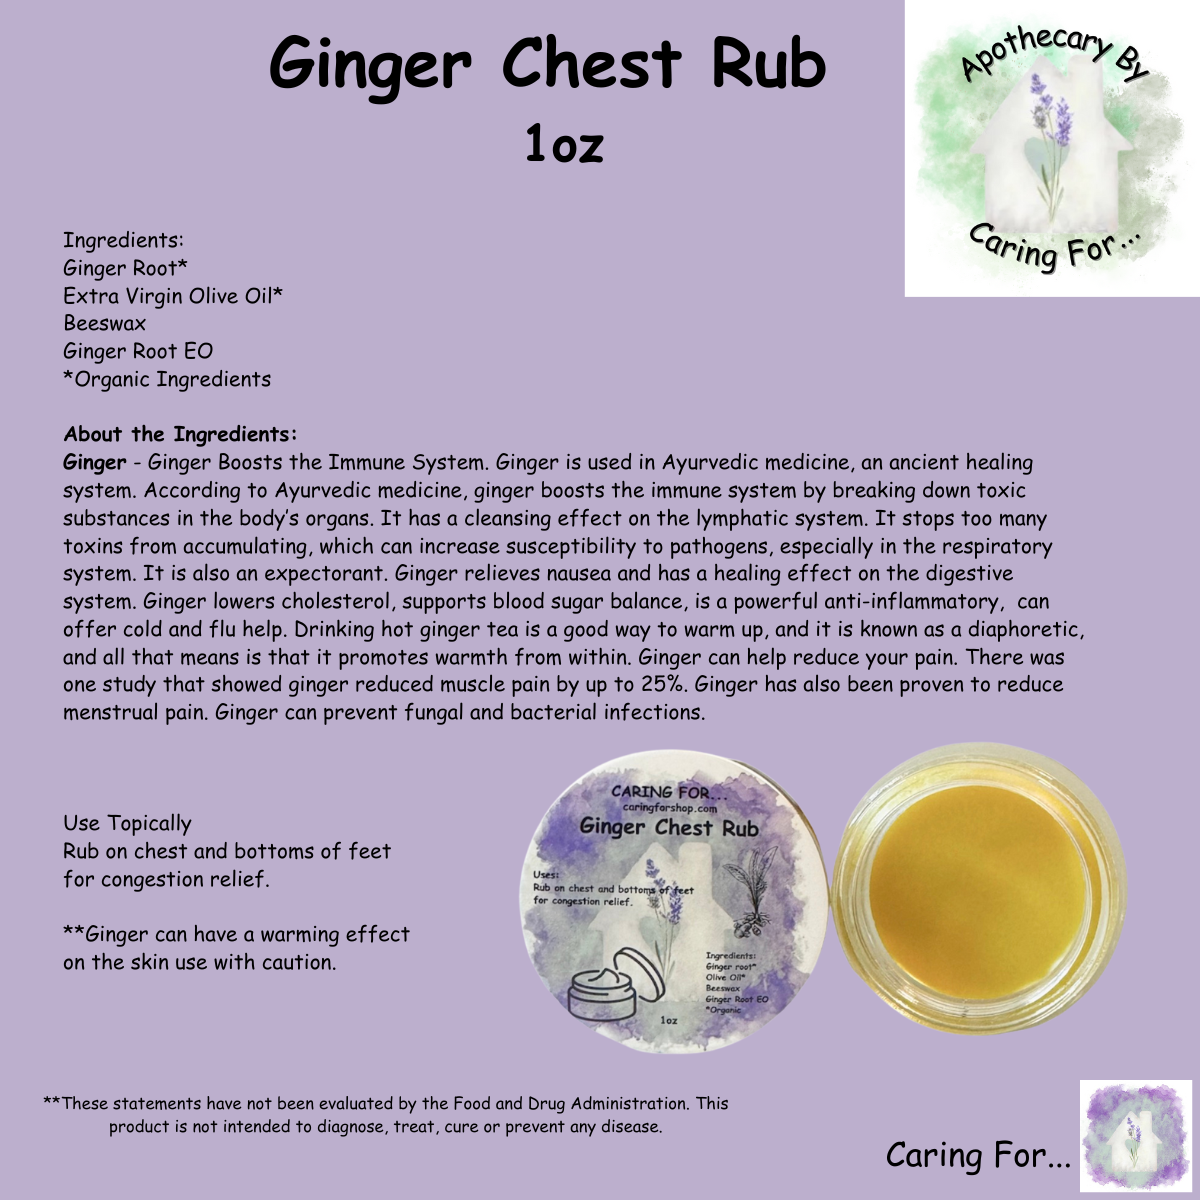 Ginger Chest Rub | Salve | Apothecary by Caring For...